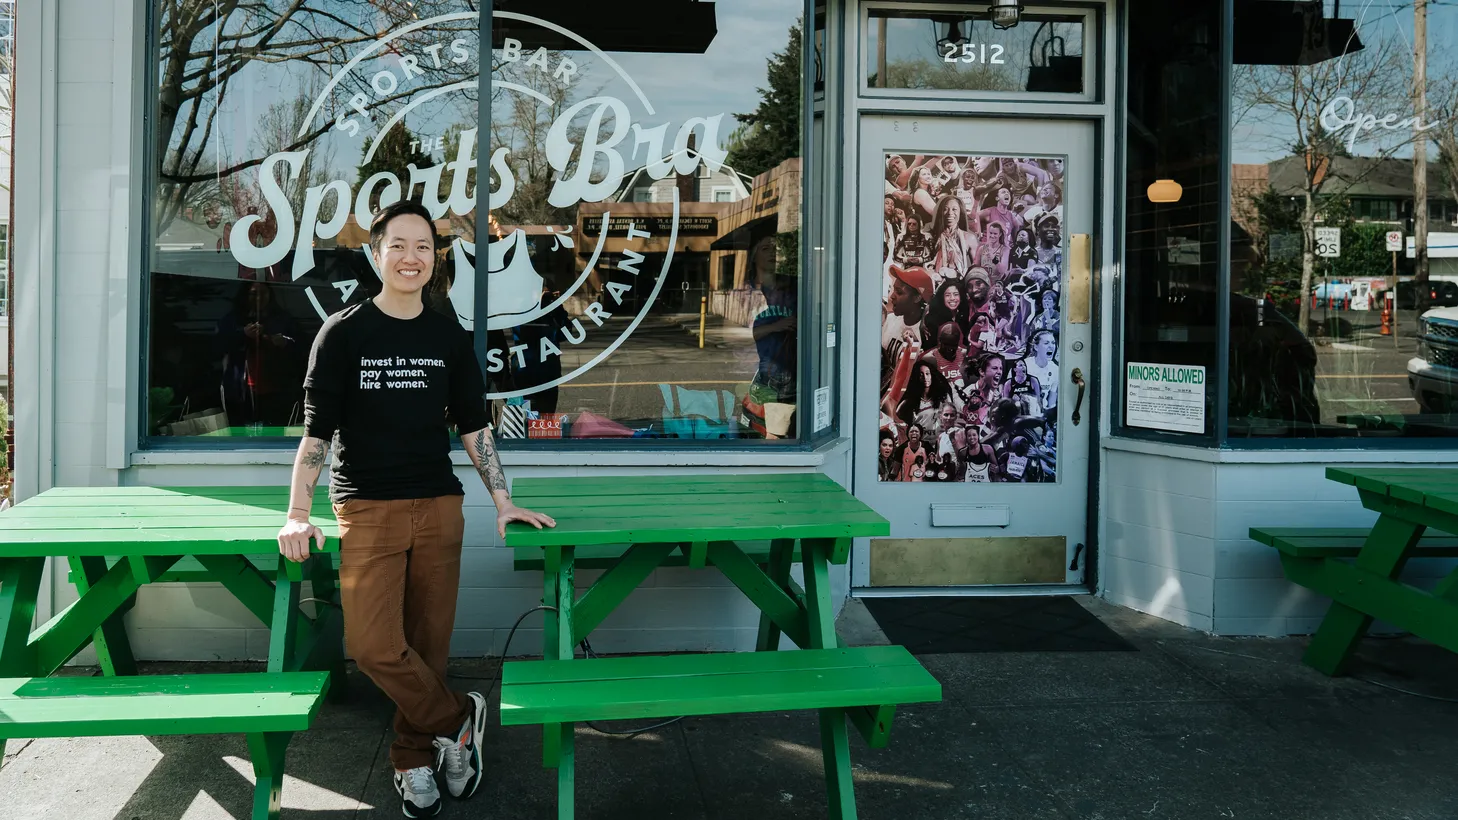 Jenny Nguyen owns and operates The Sports Bar in Portland, Ore., dedicated to supporting women’s athletics.